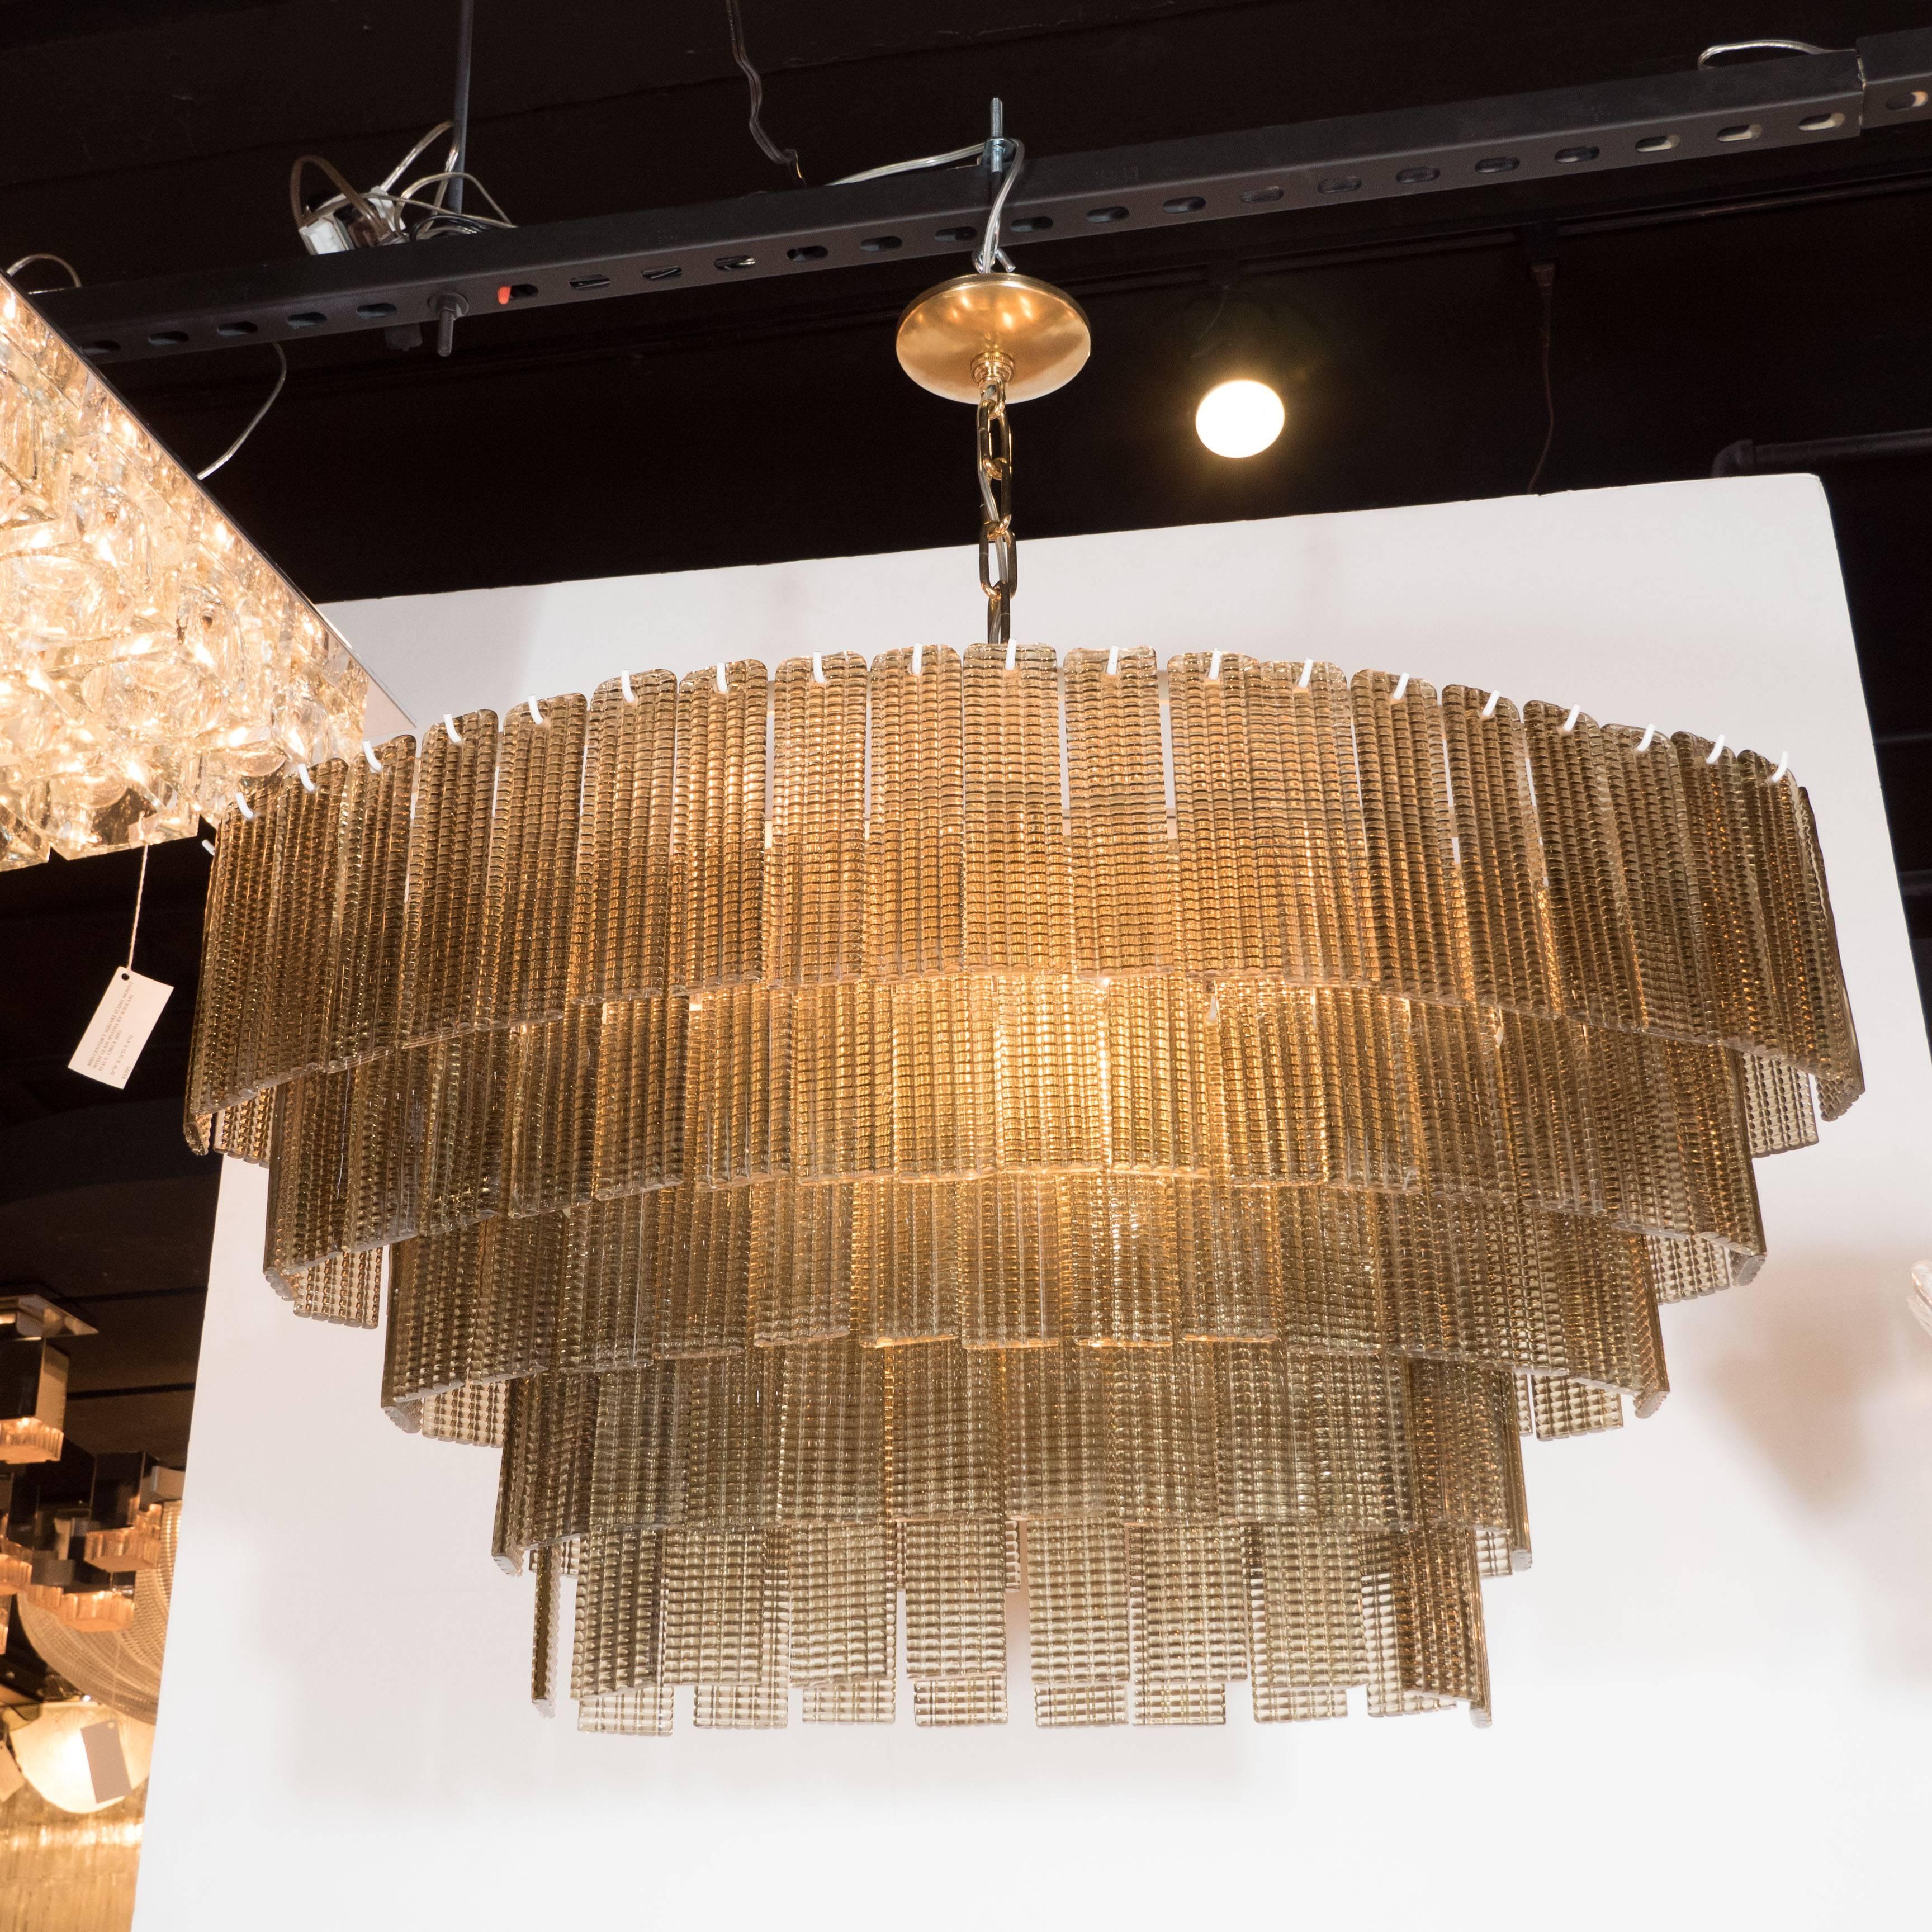 This stunning Mid-Century Murano five-tier chandelier with textured glass shades. An enameled chrome frame supports five tiers of independently hung rectangular textured glass shades in a semi-translucent gold hue. The fixture accommodates eight